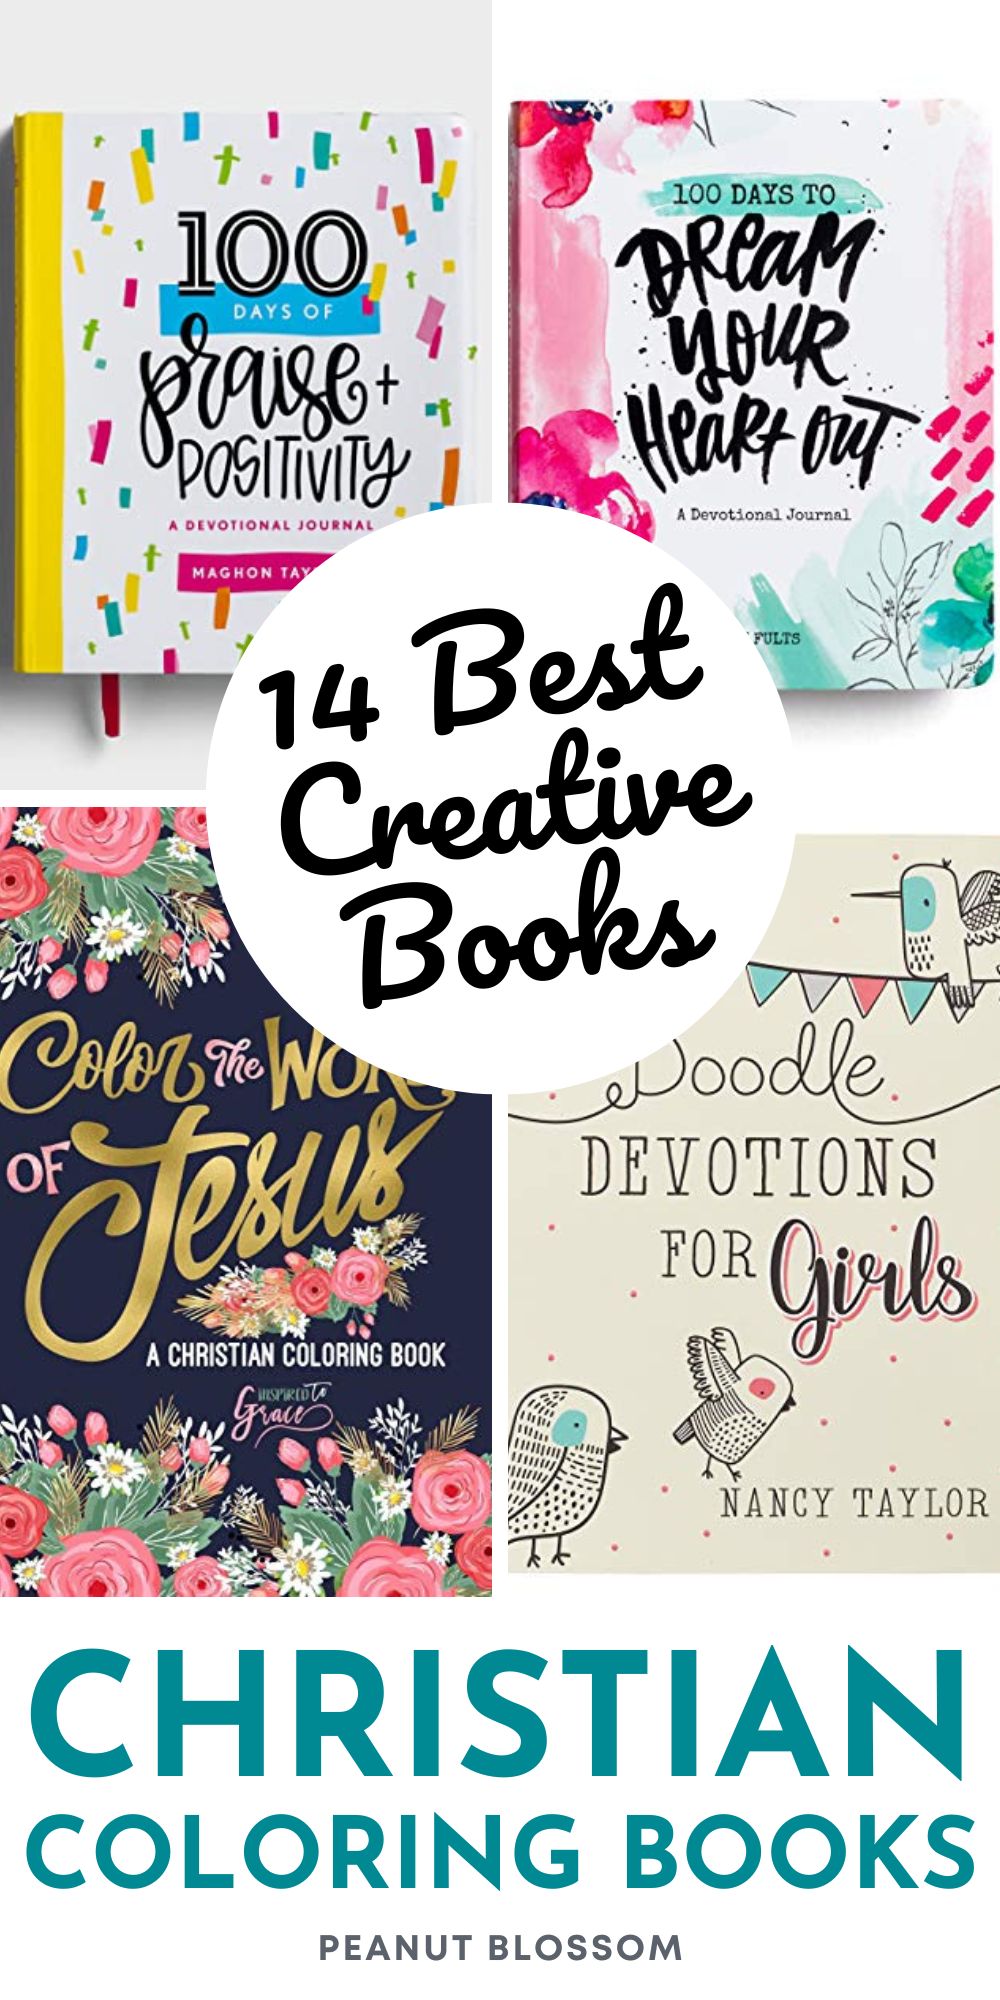 A photo collage shows the covers of 4 Christian coloring books.